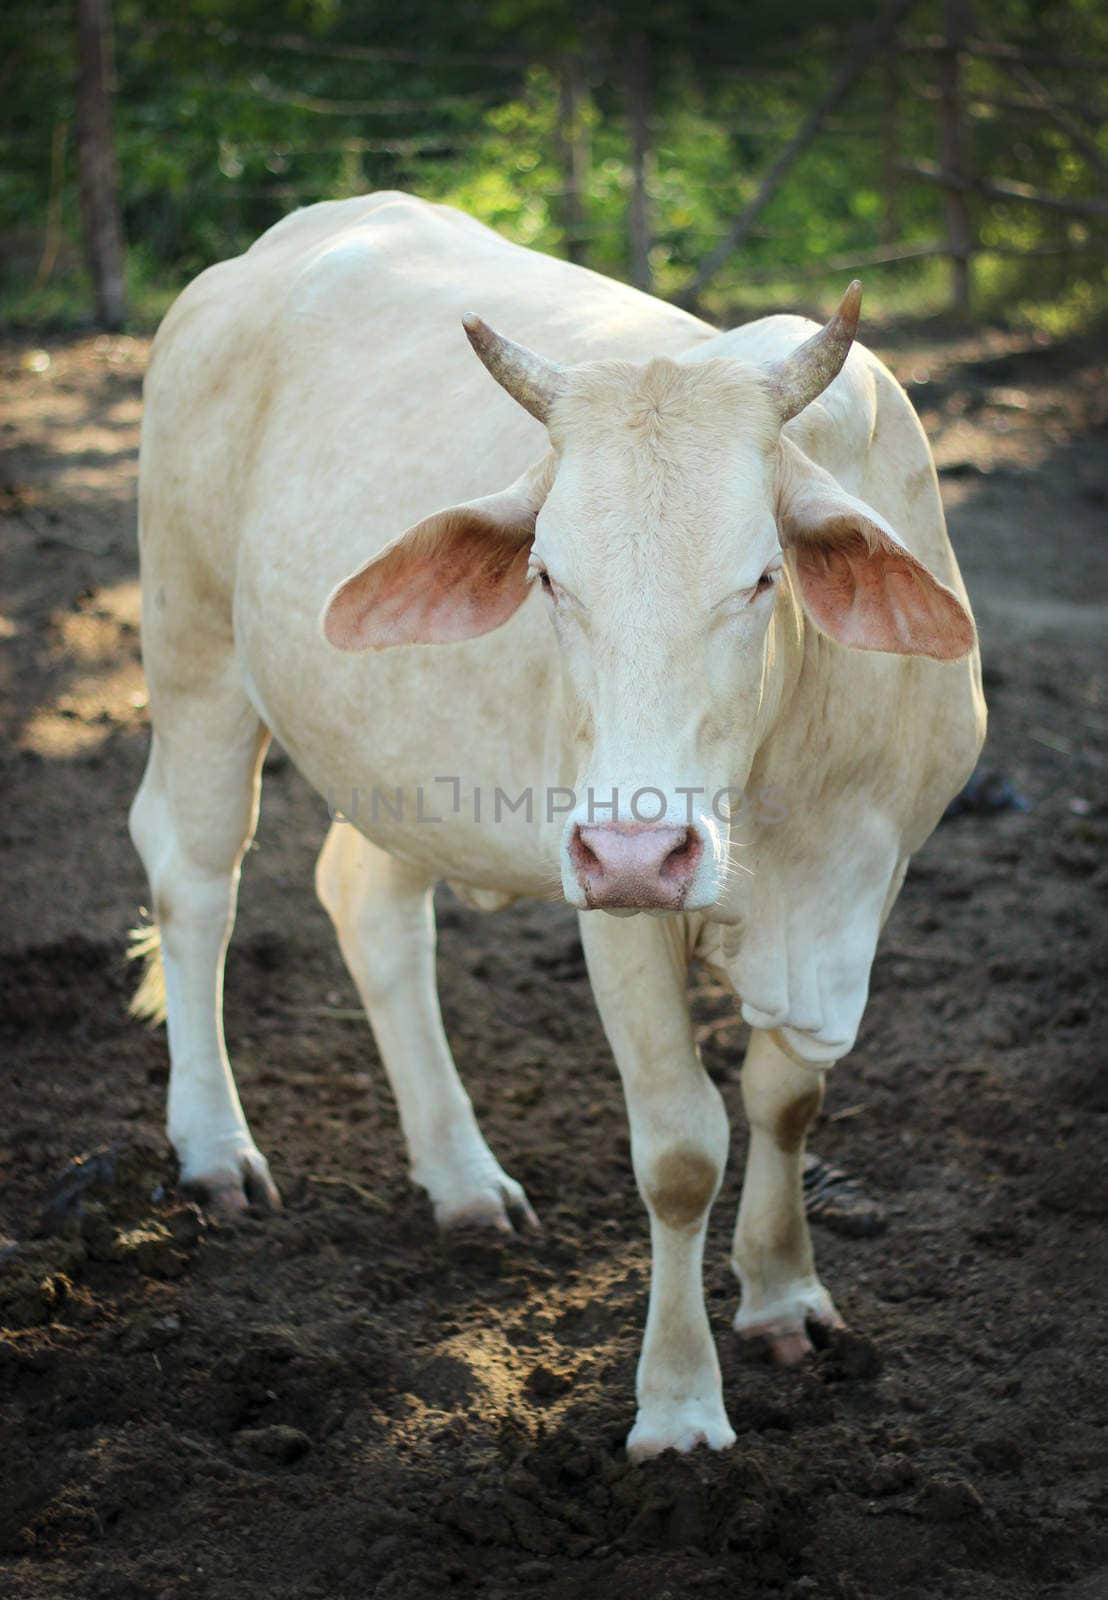 Cow with horns standing staring on the ground. by yod67